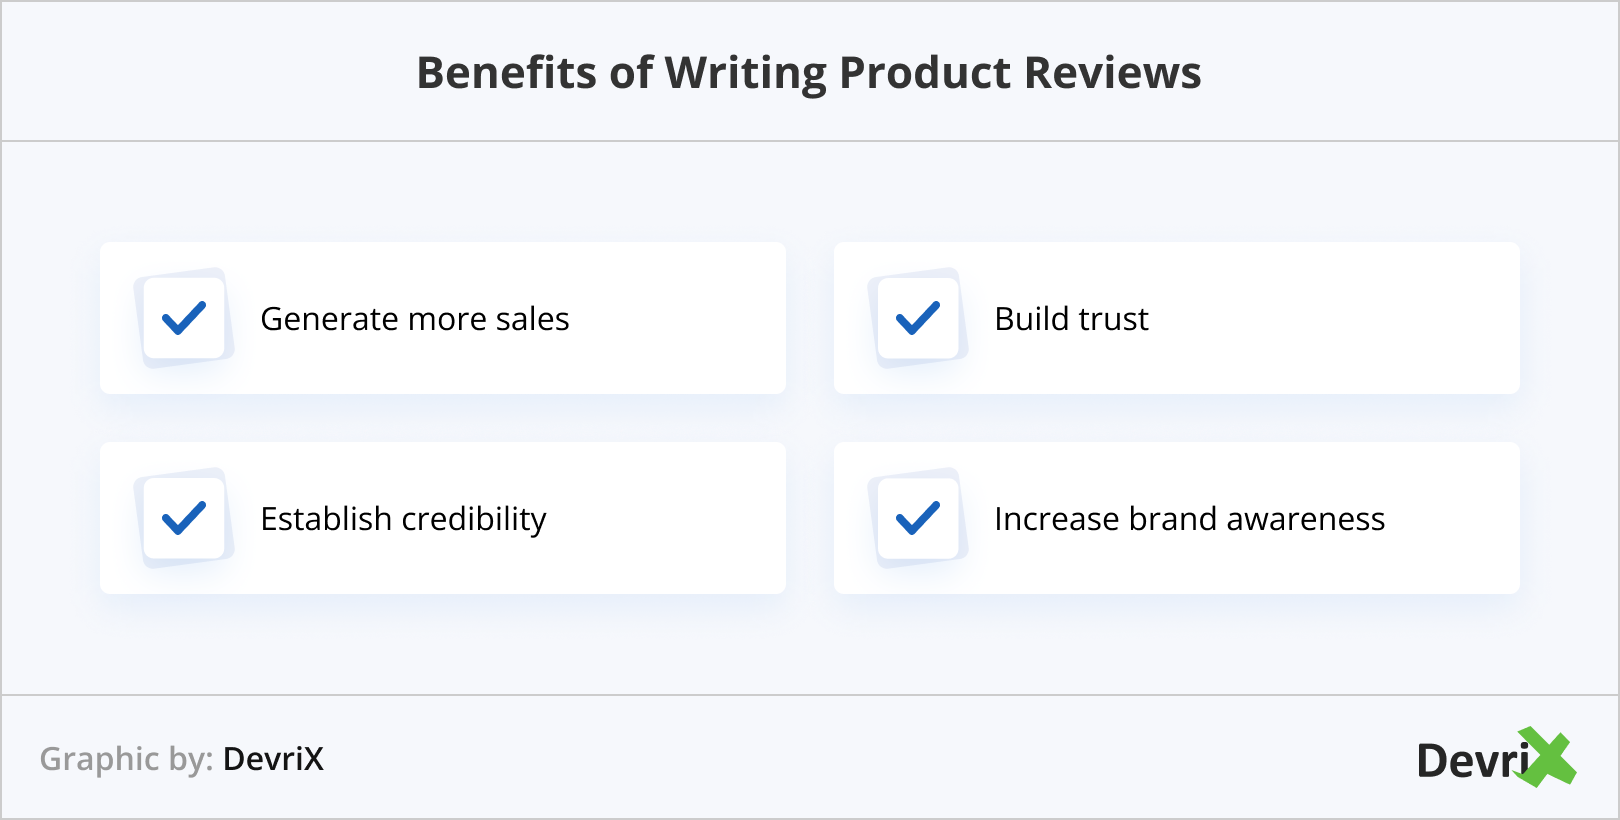 Benefits of Writing Product Reviews